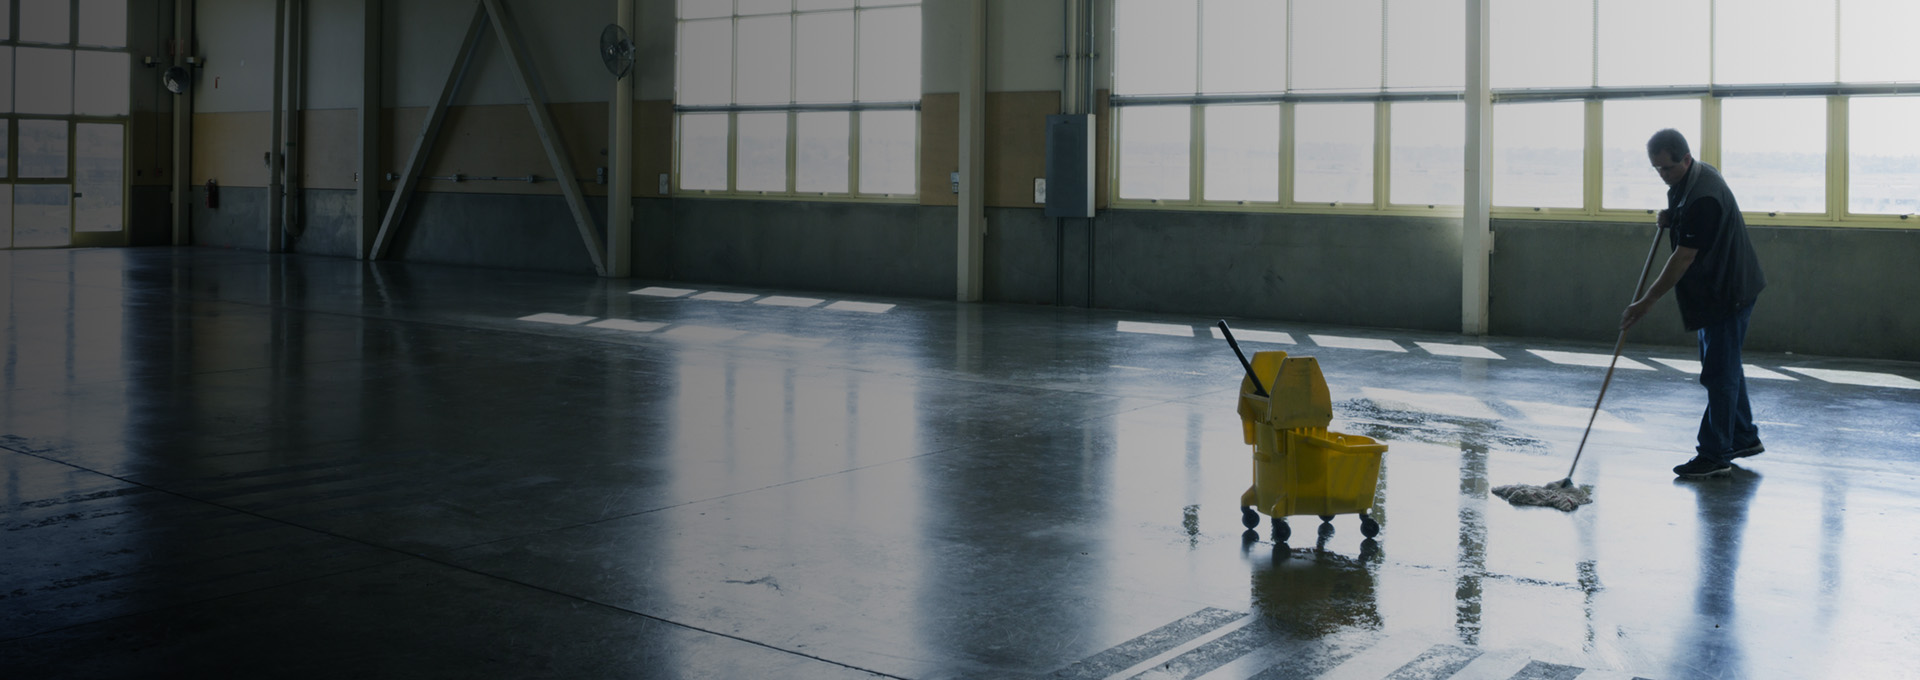 Man mopping the floor of warehouse